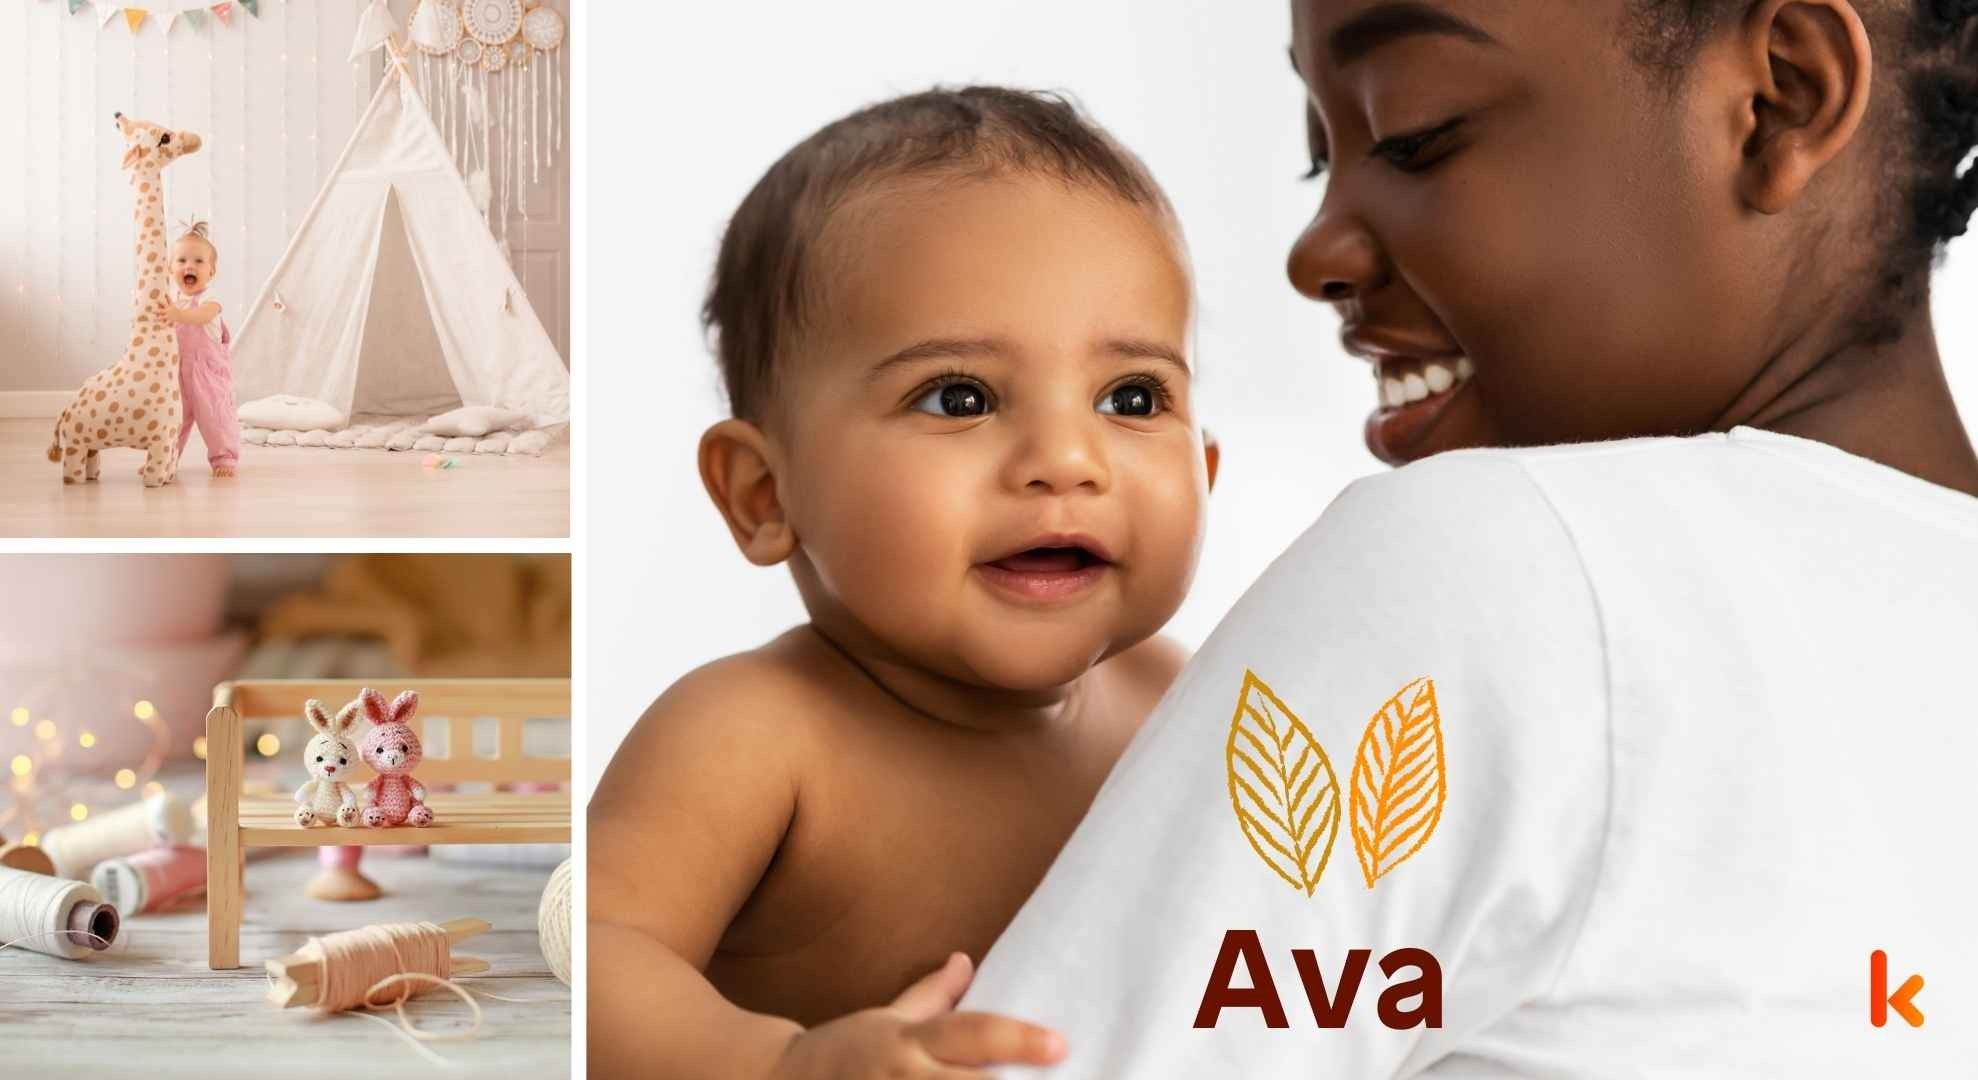 Meaning of the name Ava